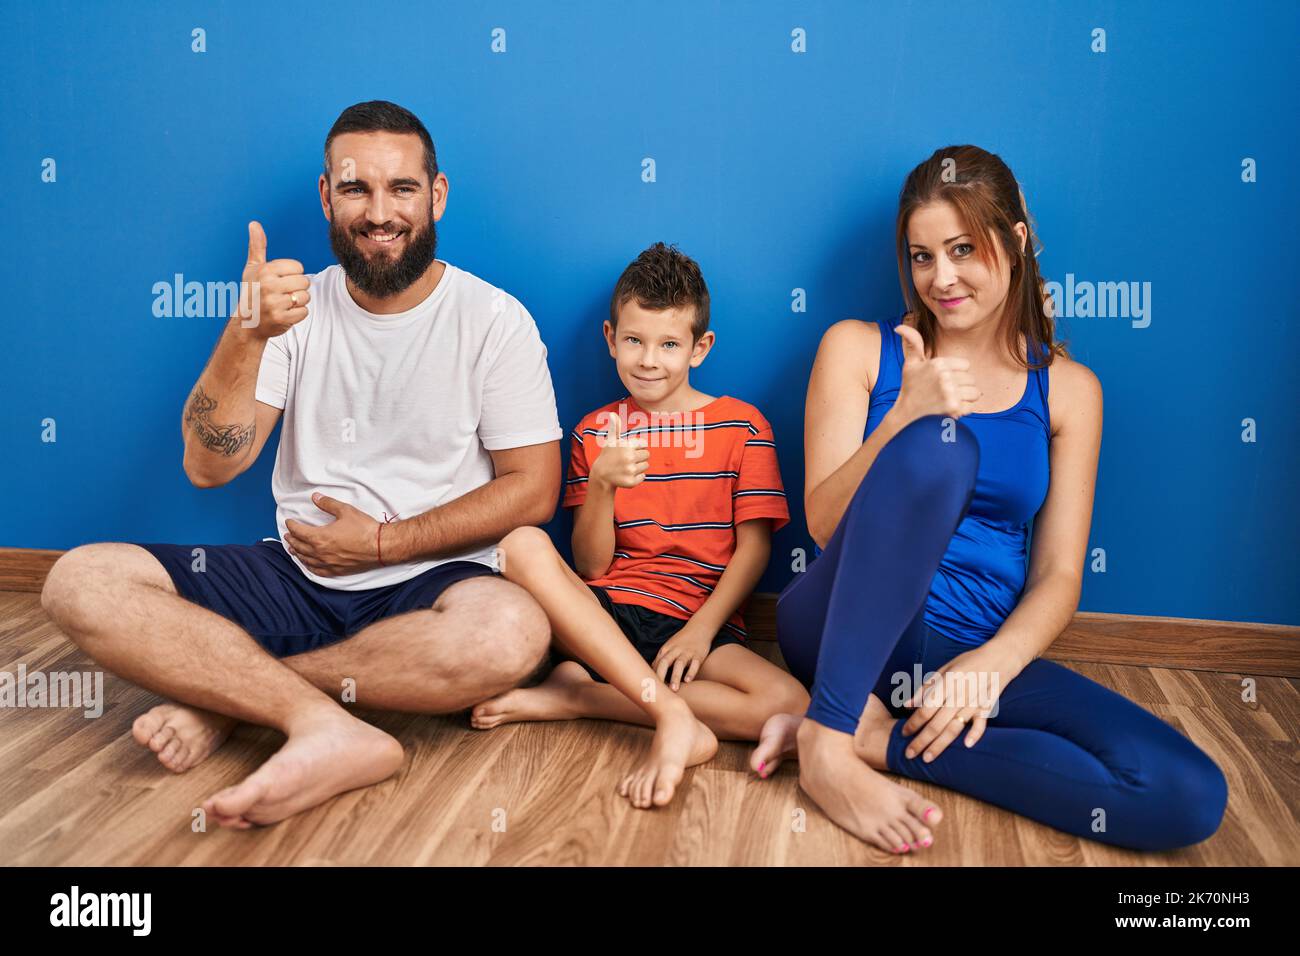 Family of three sitting on the floor at home doing happy thumbs up gesture with hand. approving expression looking at the camera showing success. Stock Photo